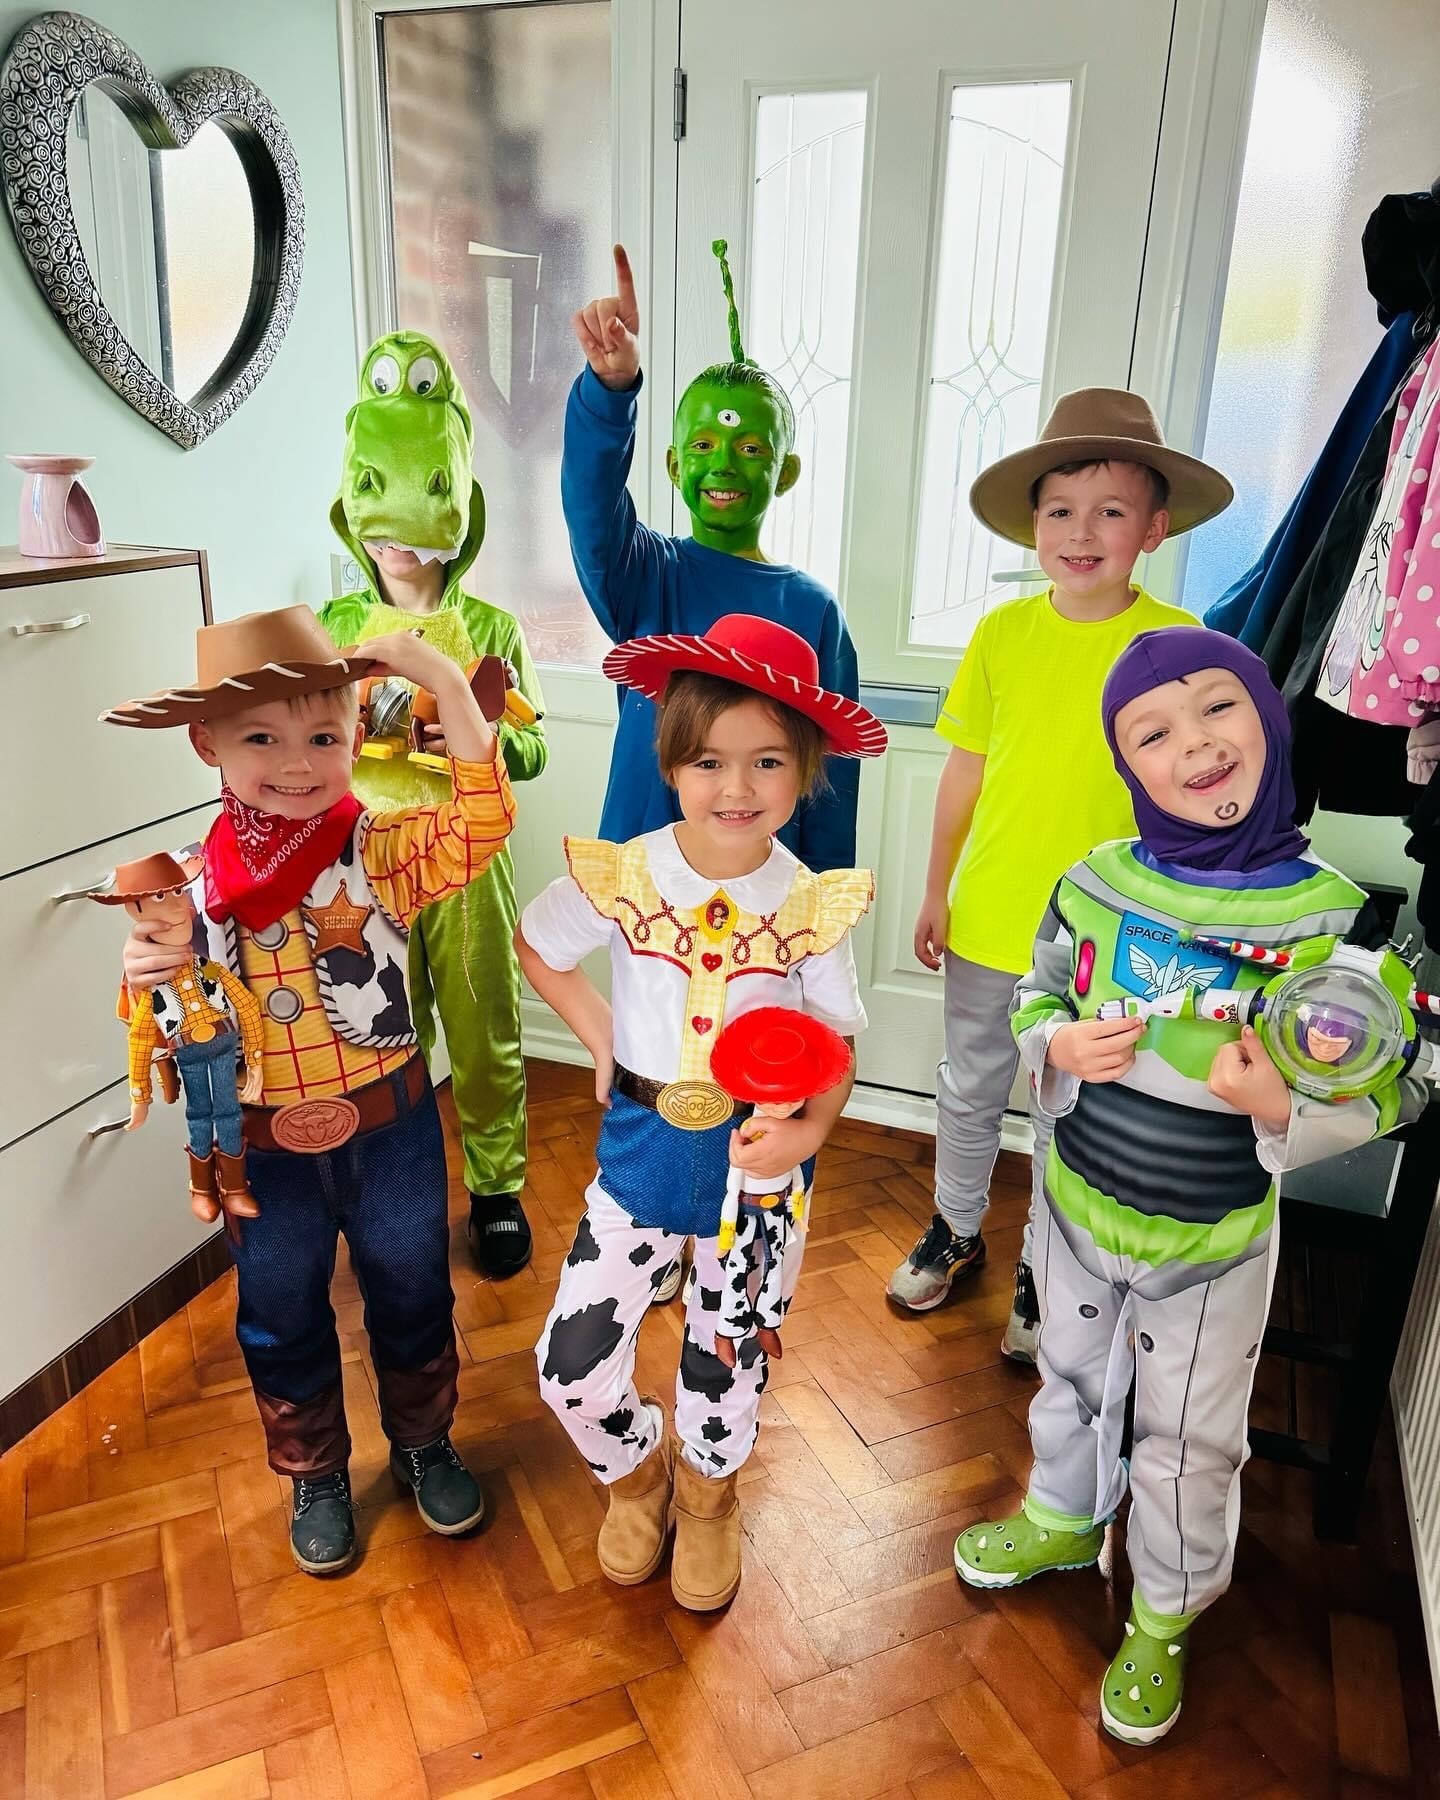 George, Fred, Freddie, Hallie, Ted and Ernie from Bebington as Rex, an alien, Andy, Woody, Jessie and Buzz